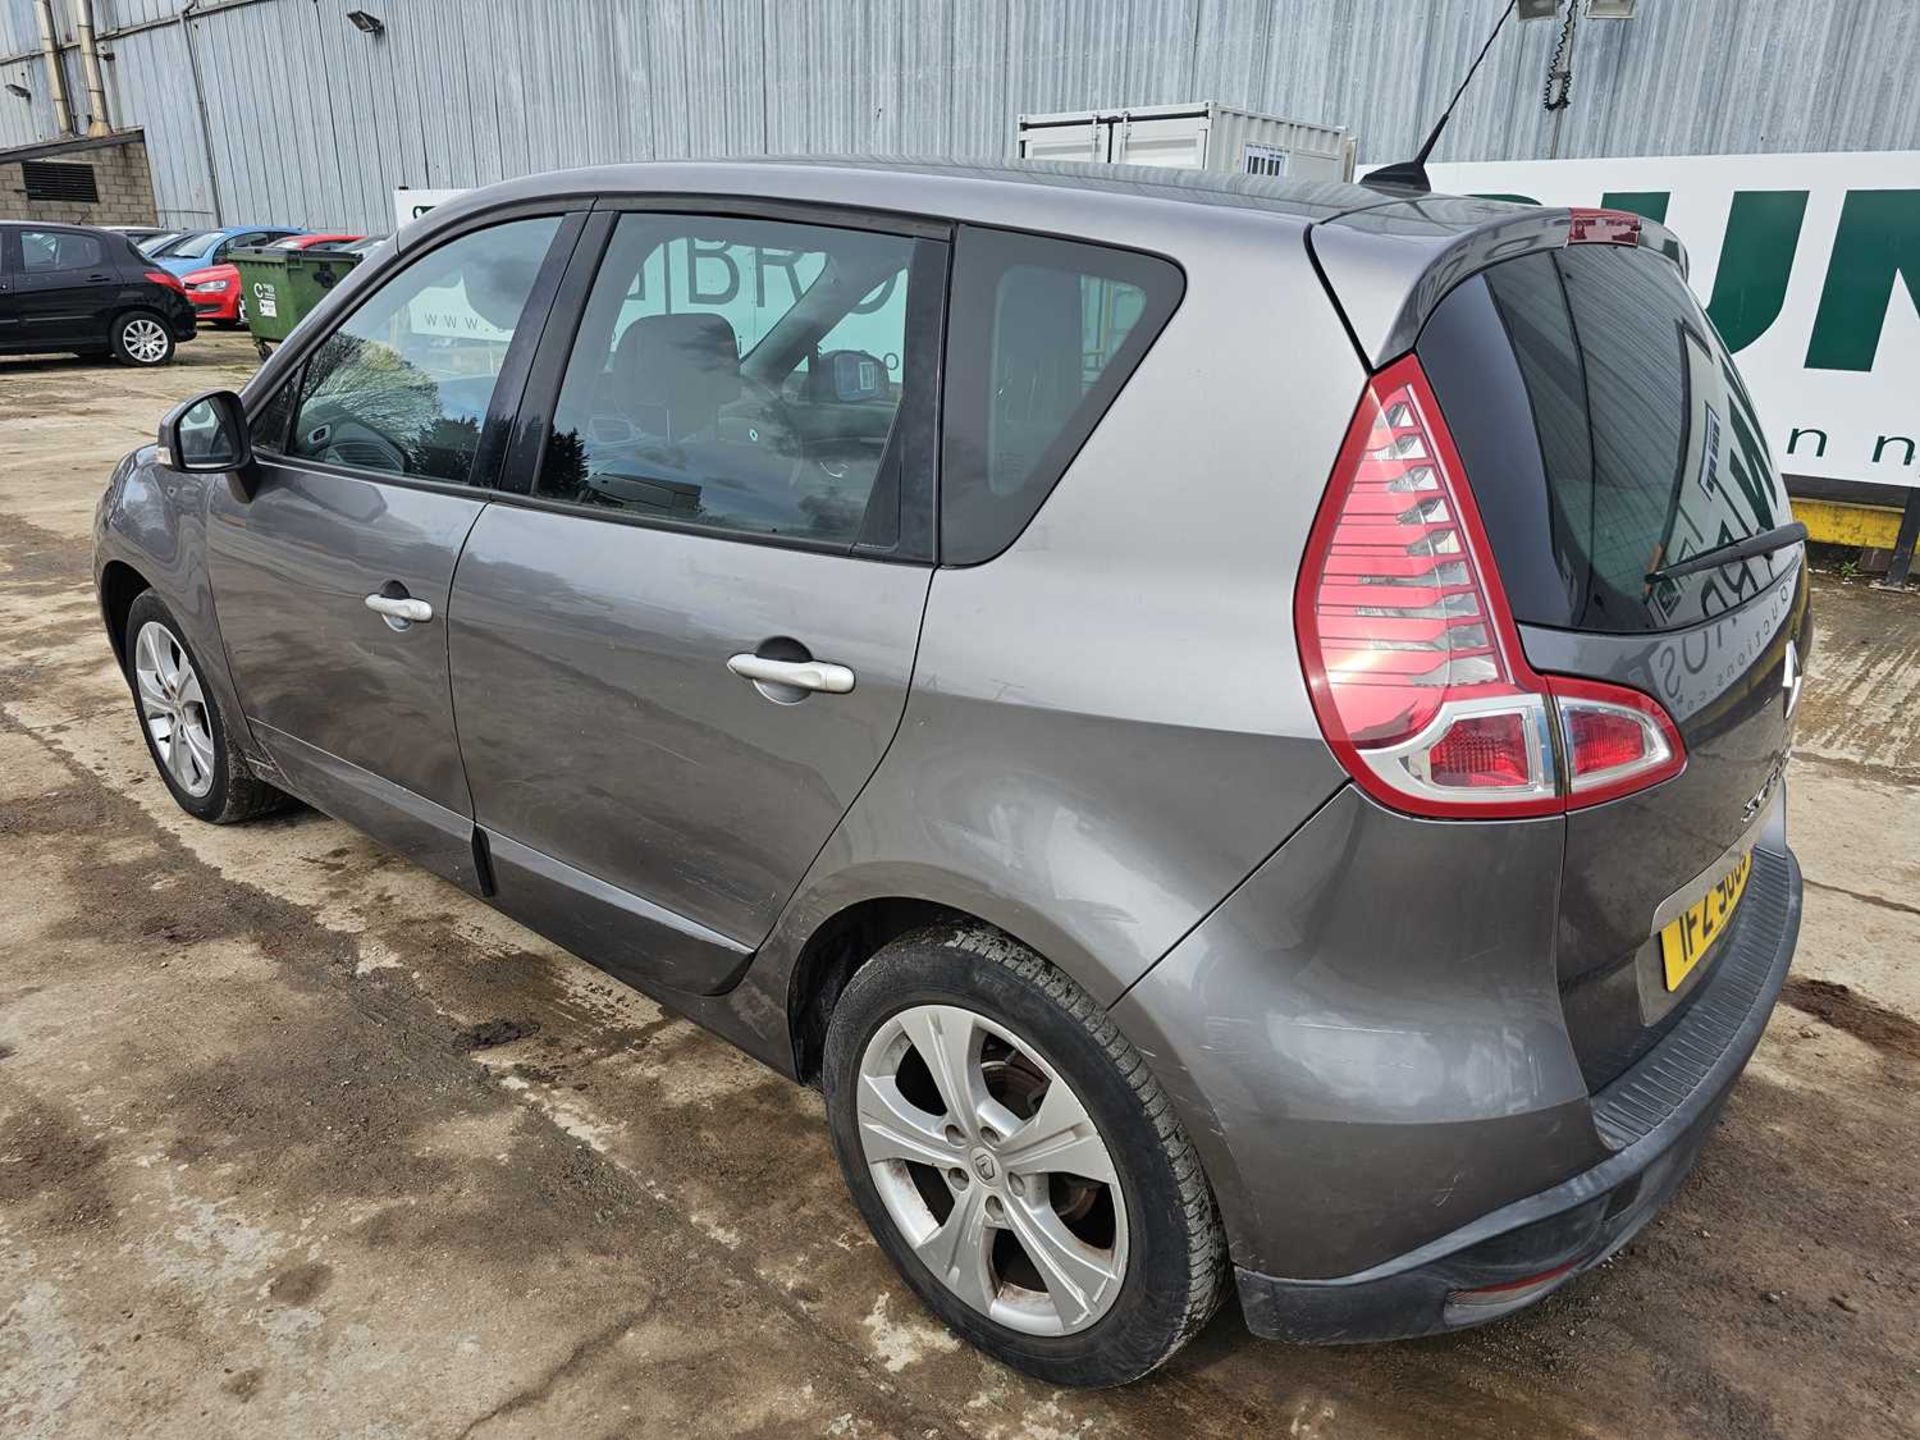 2011 Renault Scenic Dynamique Ttom, 6 Speed, Sat Nav, Bluetooth, Cruise Control, A/C (Reg. Docs. & S - Image 4 of 26